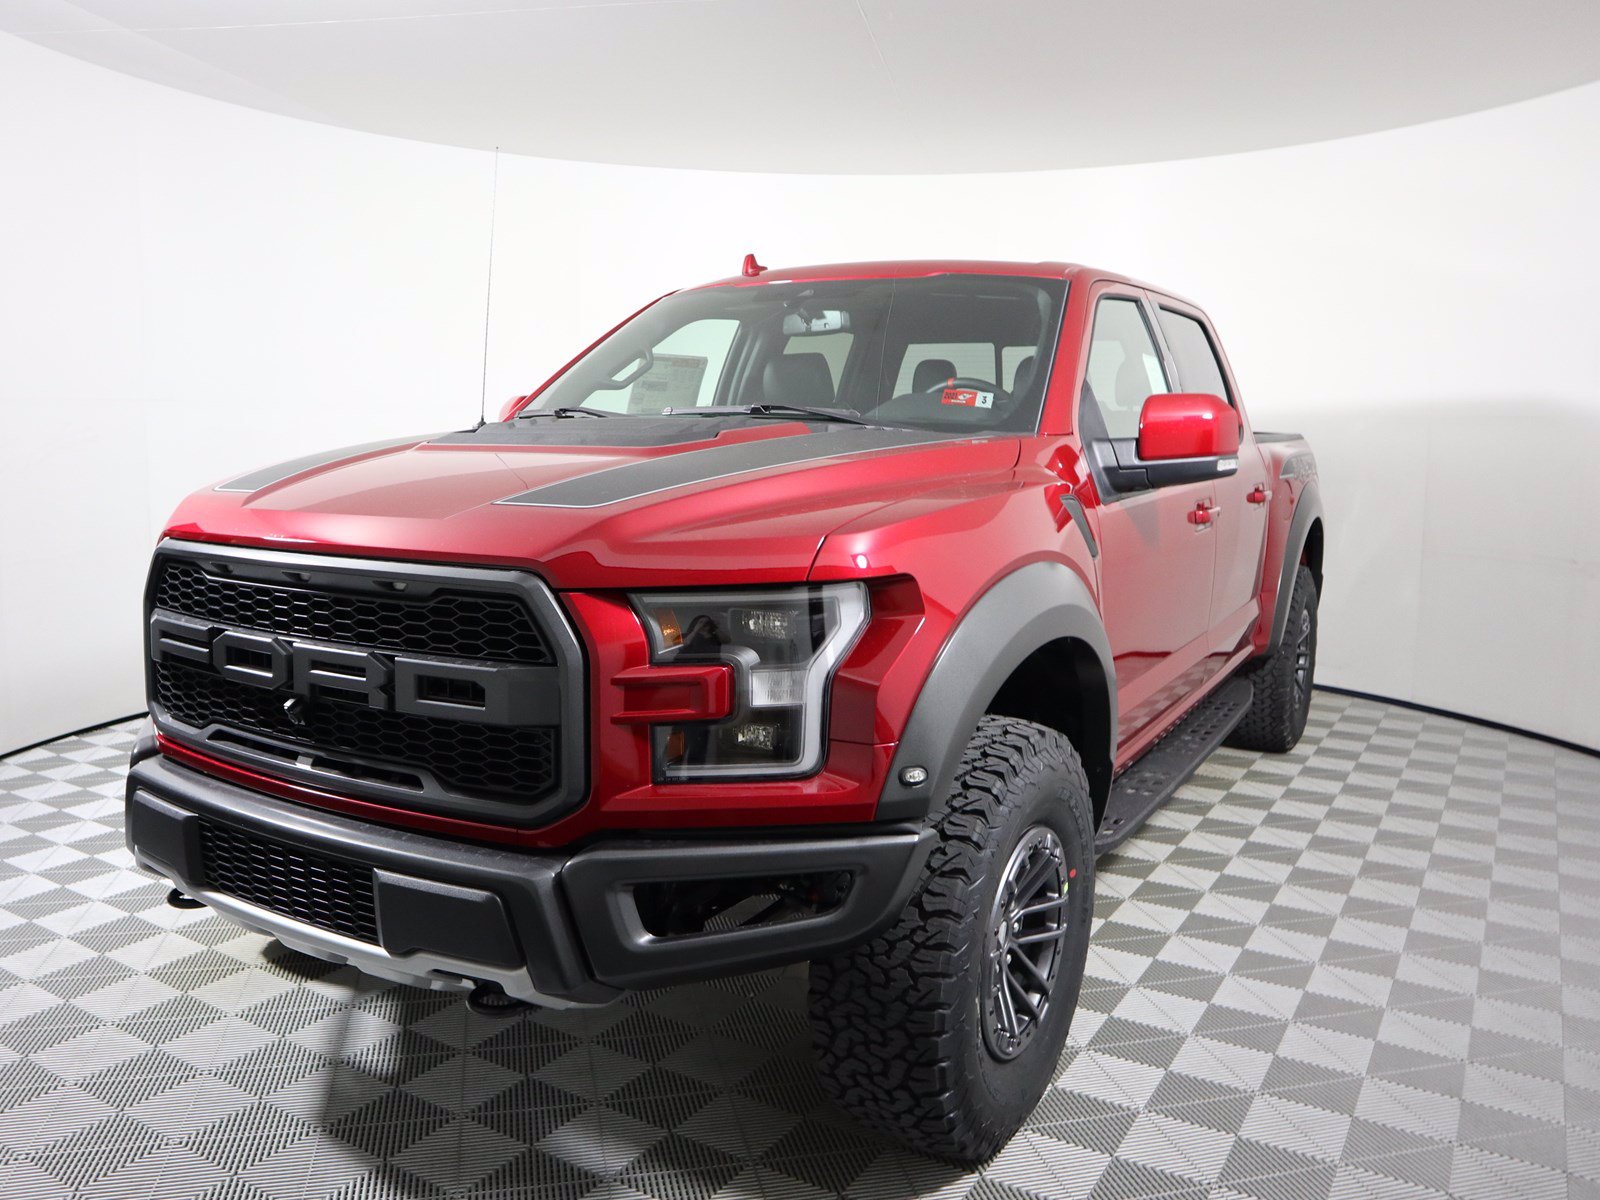 New 2020 Ford F-150 Raptor Crew Cab Pickup in Parkersburg ...